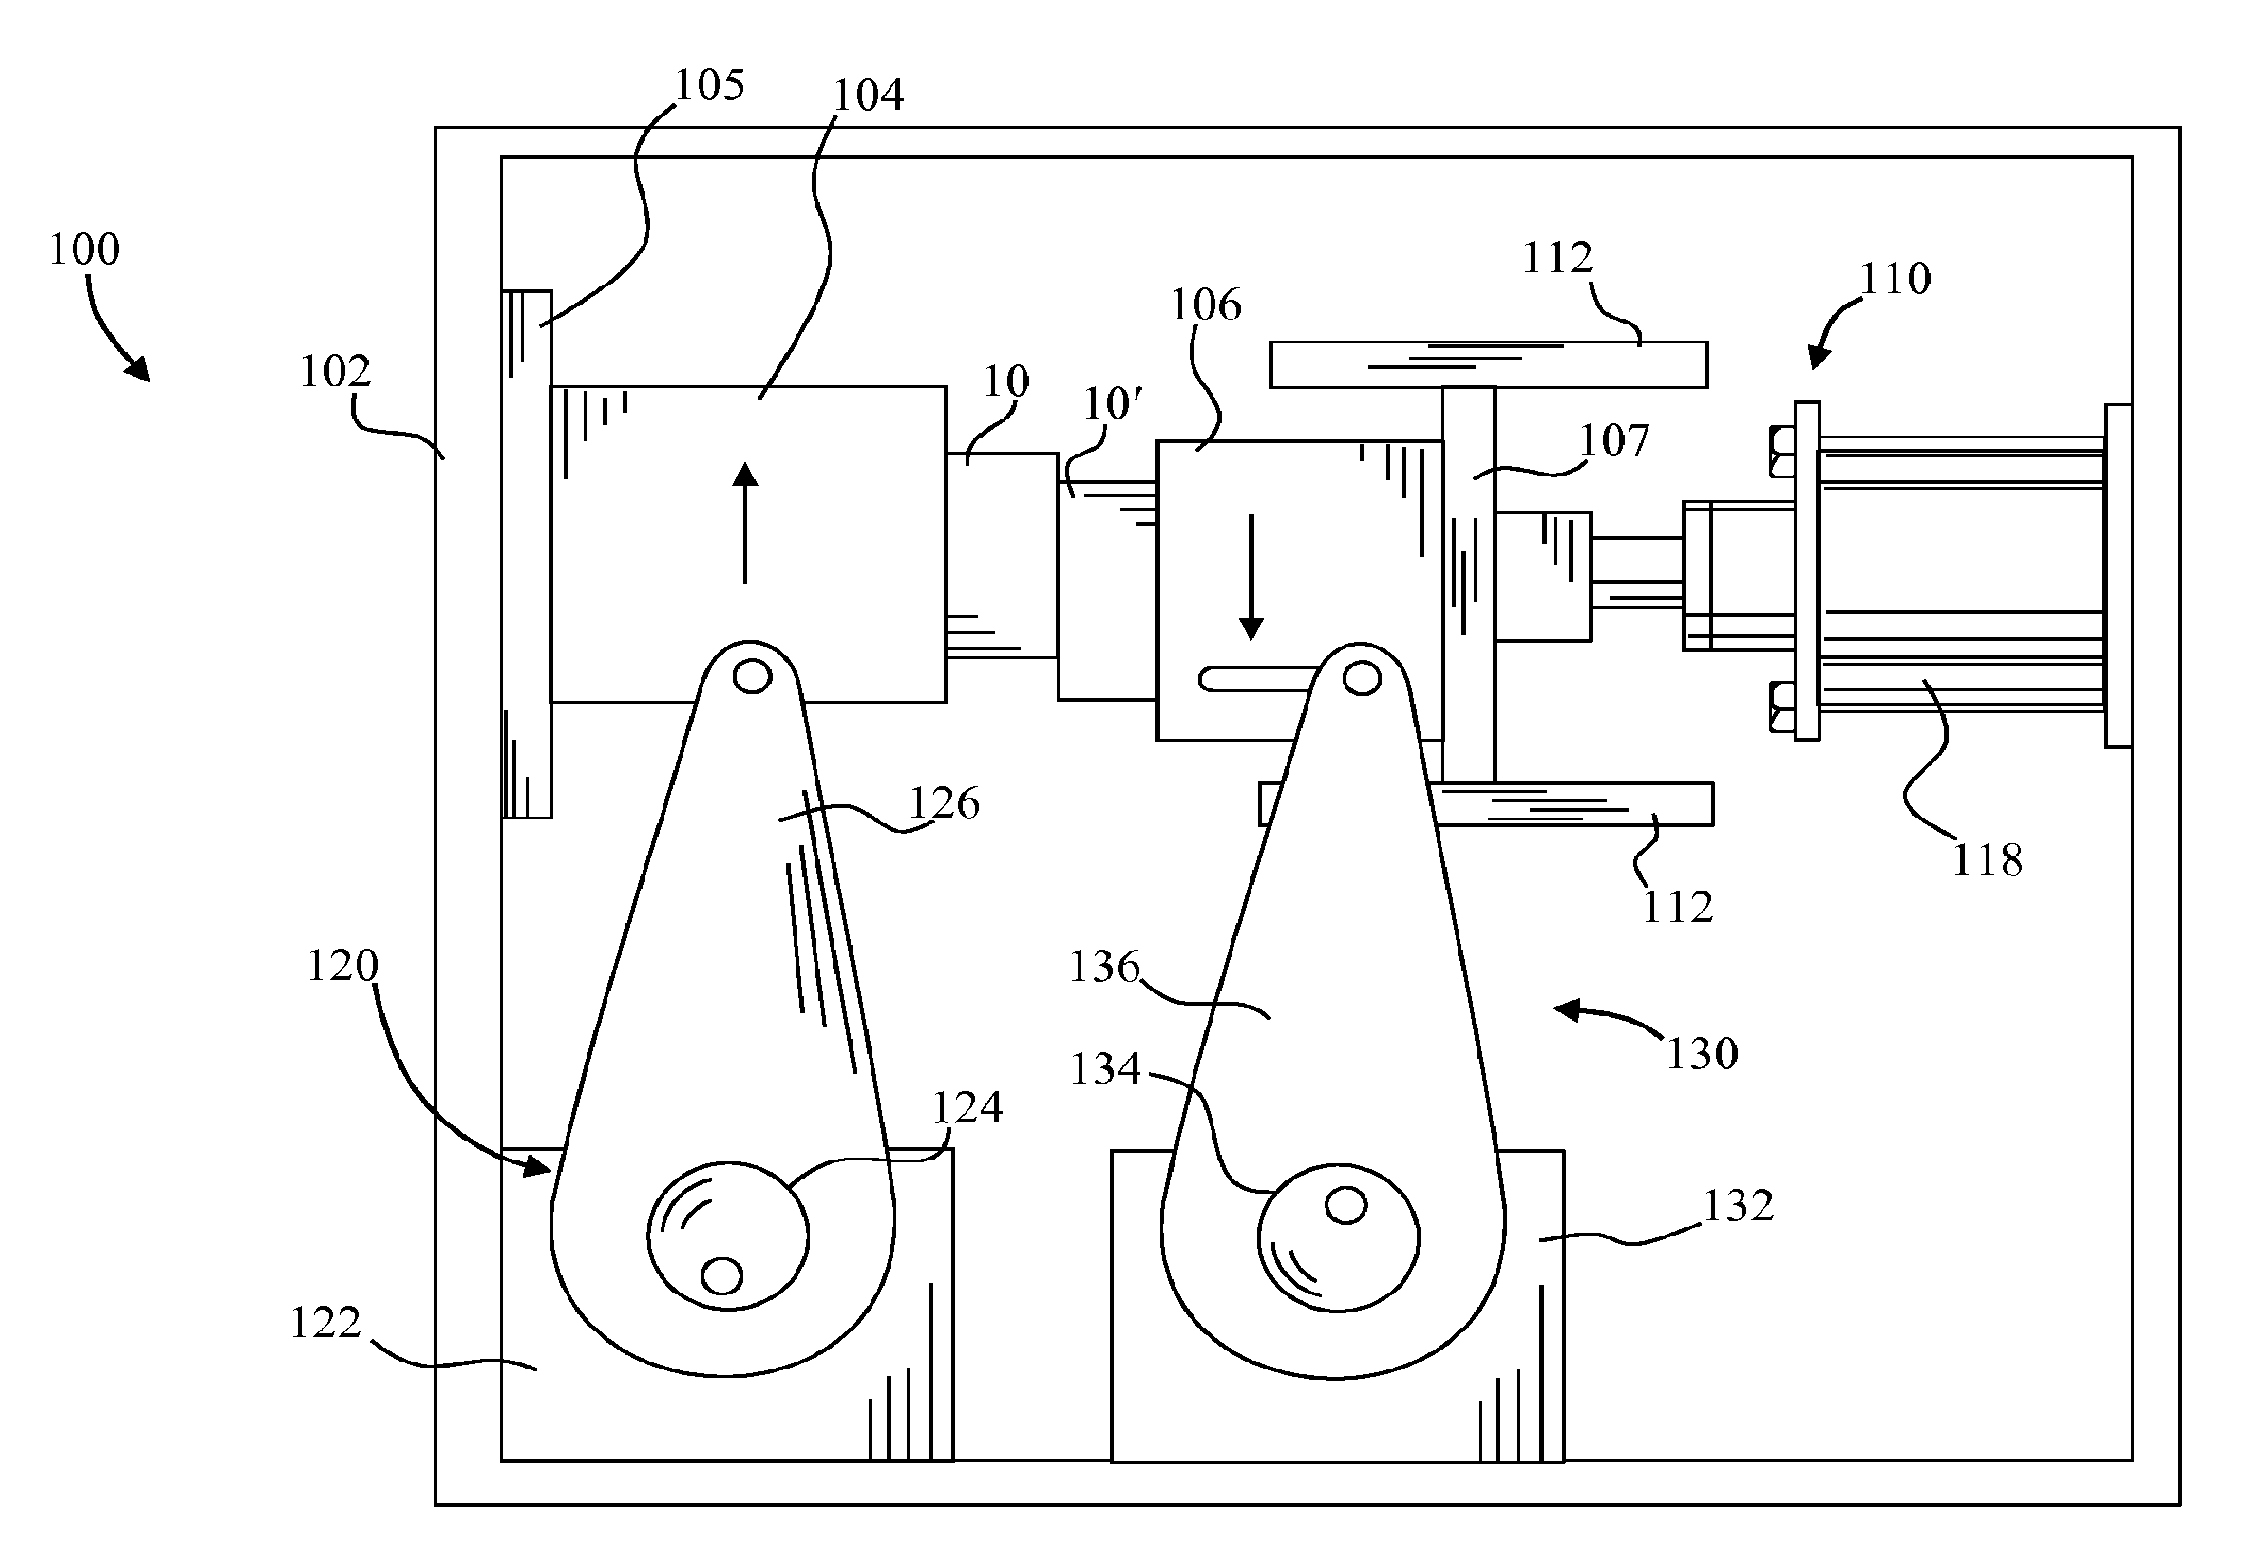 Apparatus for Linear Friction Welding